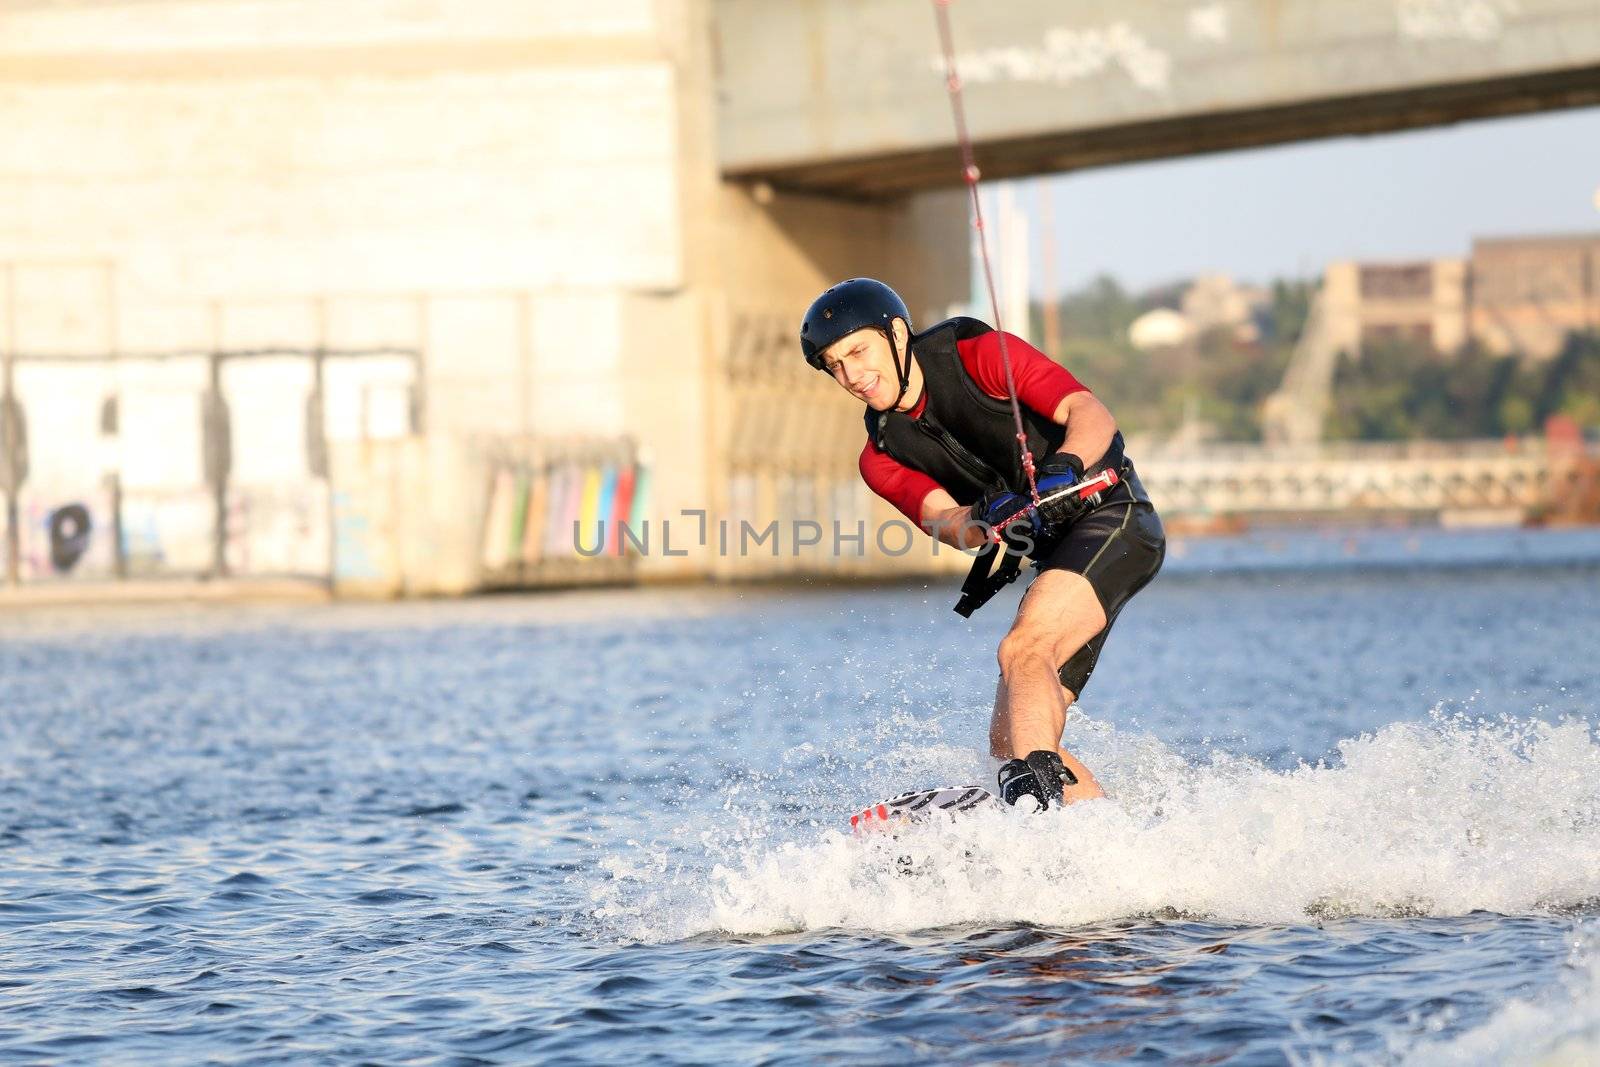 Wakeboarder surfing across the river